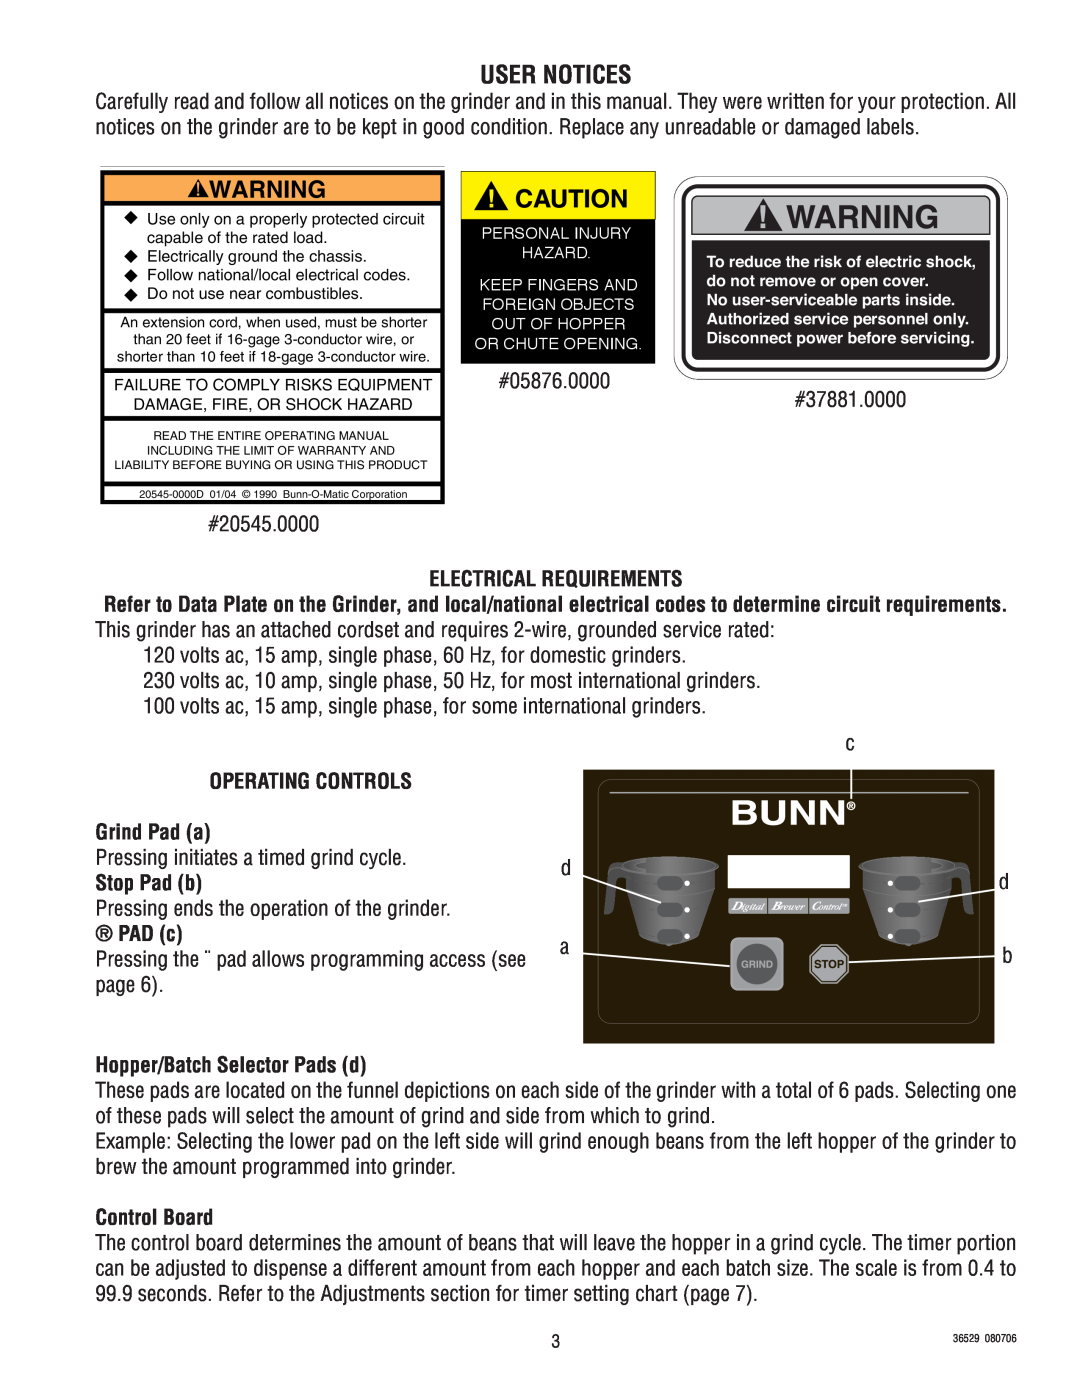 Bunn Dual SH manual User Notices, Electrical Requirements, OPERATING CONTROLS Grind Pad a, Stop Pad b, PAD c, Control Board 